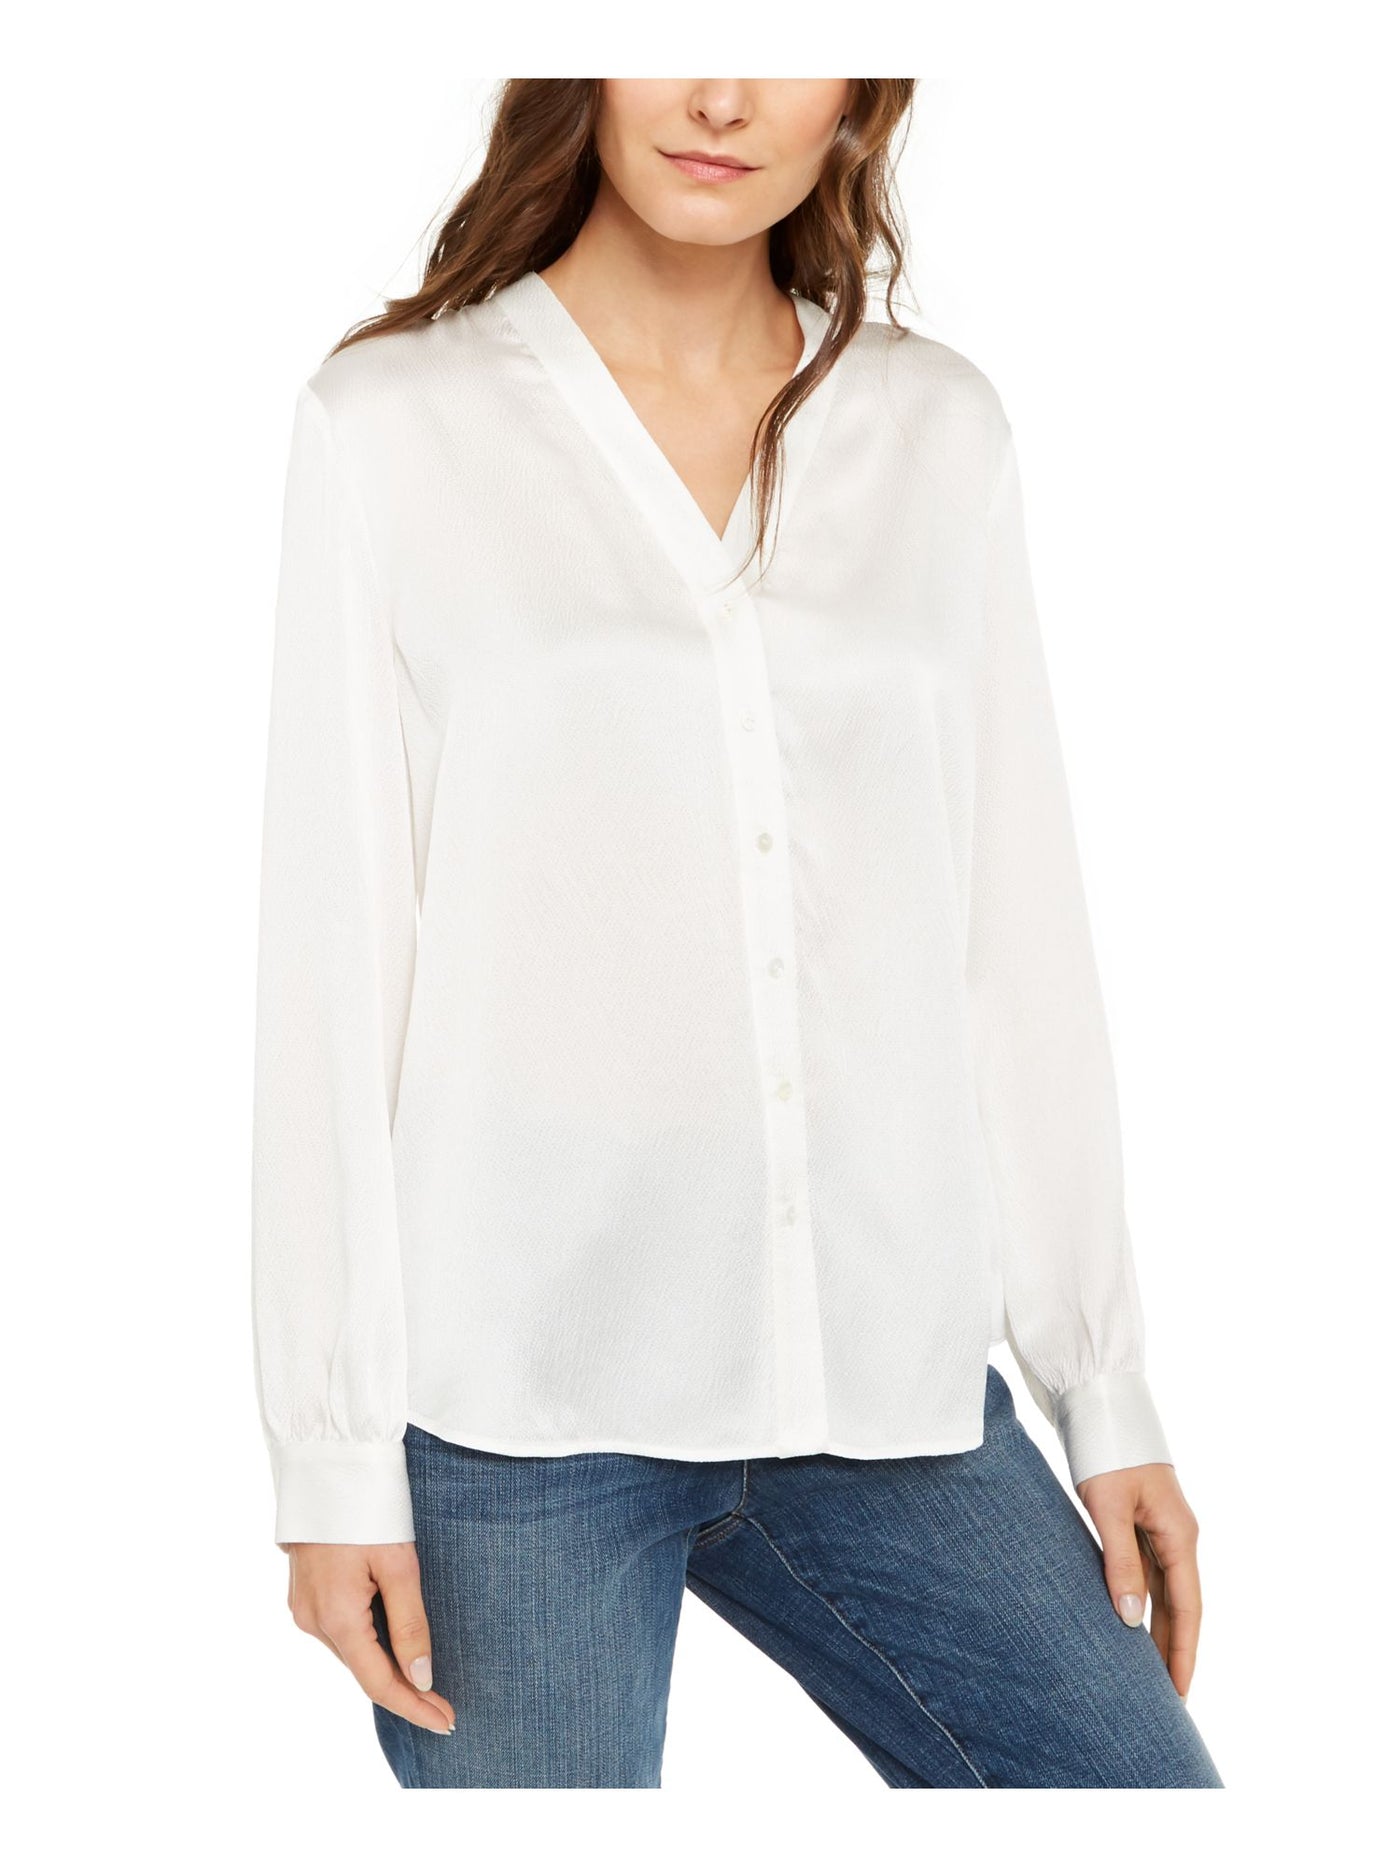 EILEEN FISHER Womens Ivory Long Sleeve With Buttons Top L